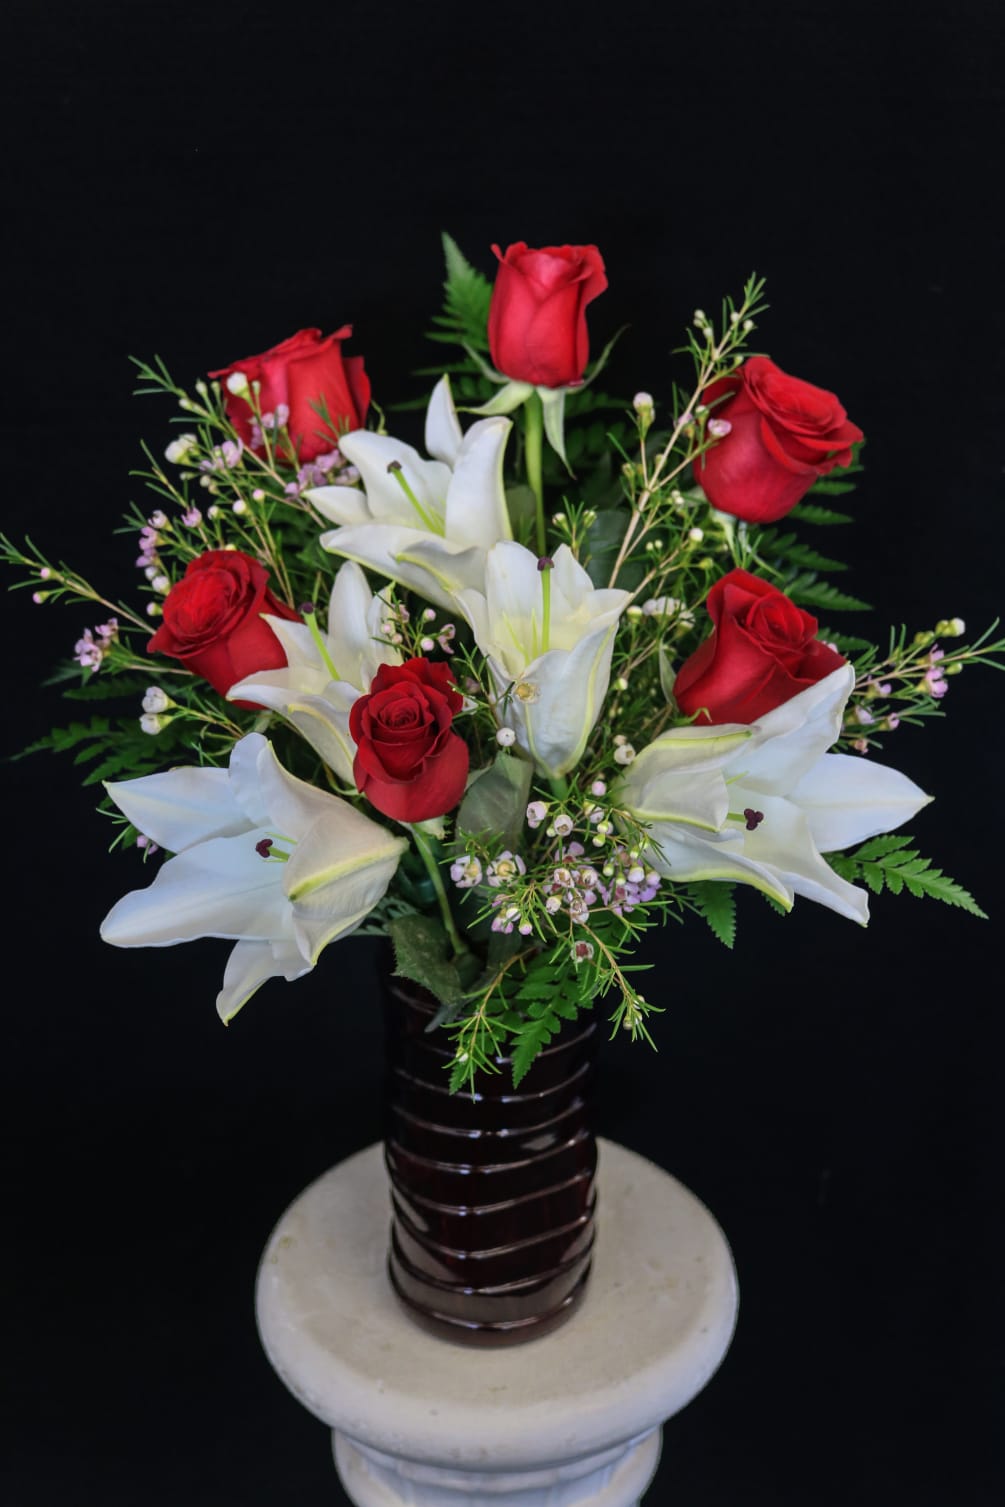 white lilies and half a dozen red roses arranged in a red